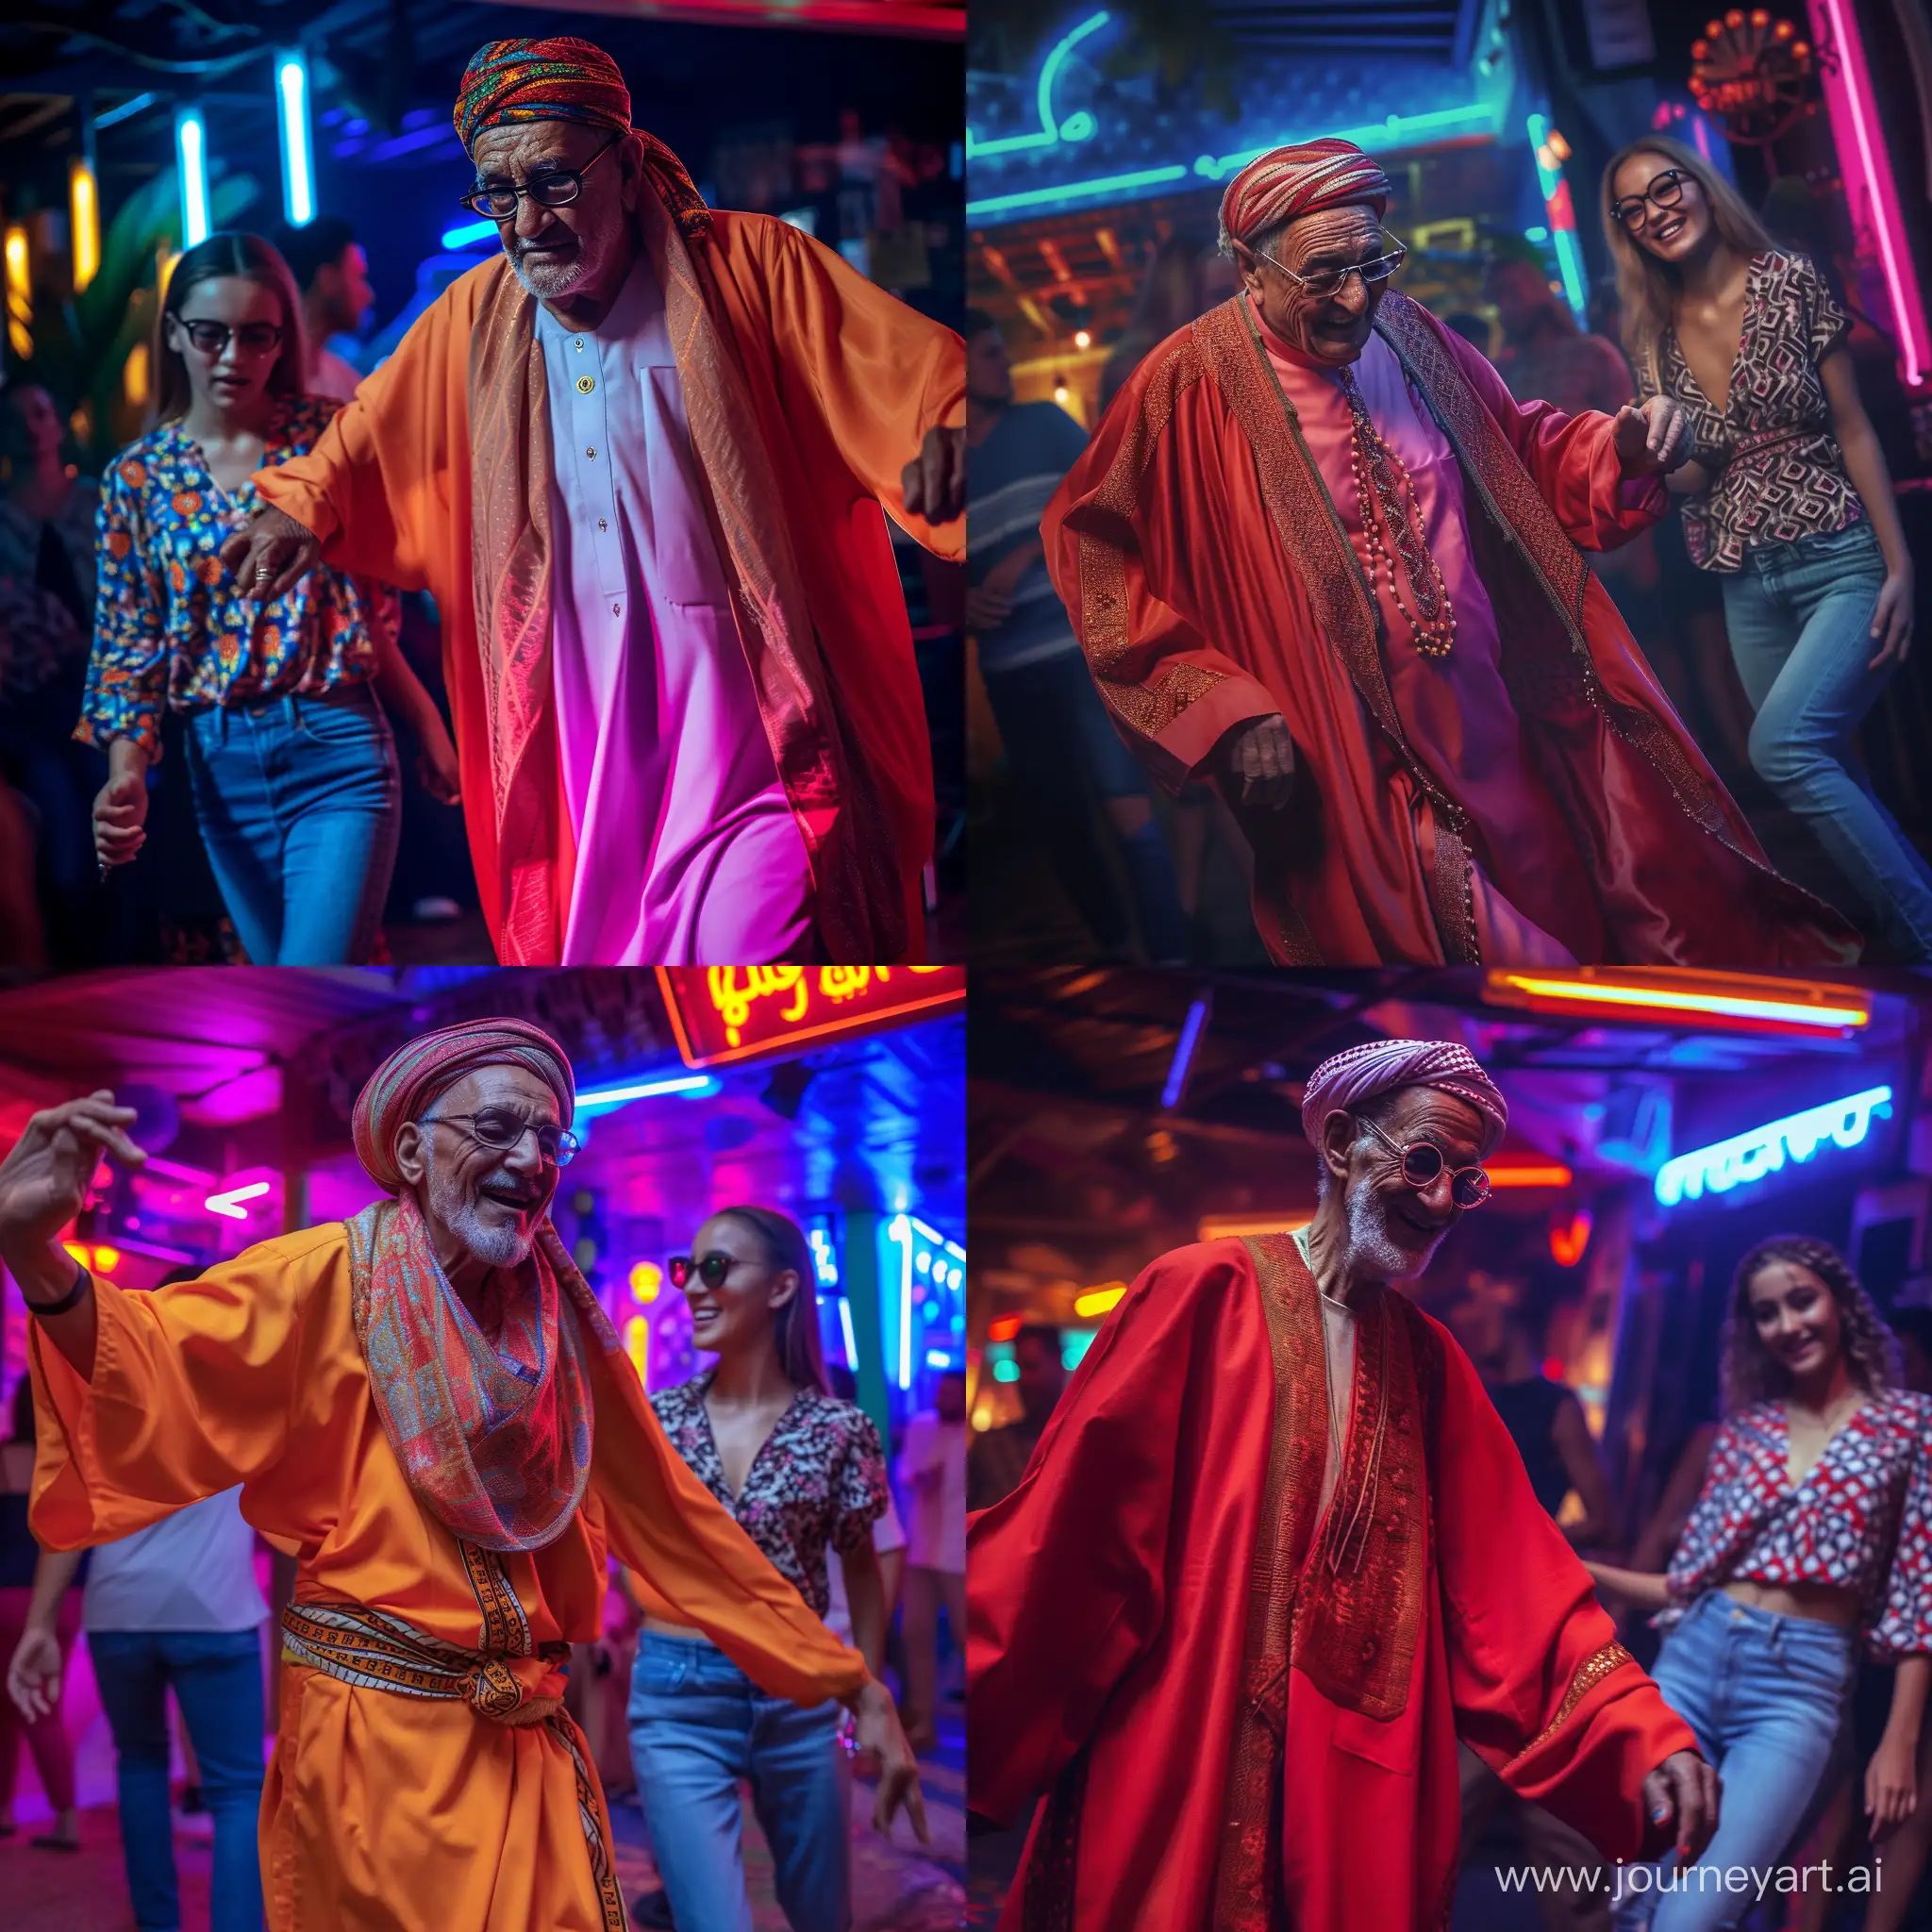 /imagine prompt: A Moroccan elder in traditional jellabah and night glasses, joyous in a vibrant nightclub atmosphere, a girl in a patterned blouse and jeans dances nearby, clearly apart. Background has club-goers and neon lights. Created Using: authentic traditional costume details, sharp foreground focus, contemporary fashion, celebratory mood, vivid nightclub environment, hd quality, natural look --ar 1:1 --v 6.0